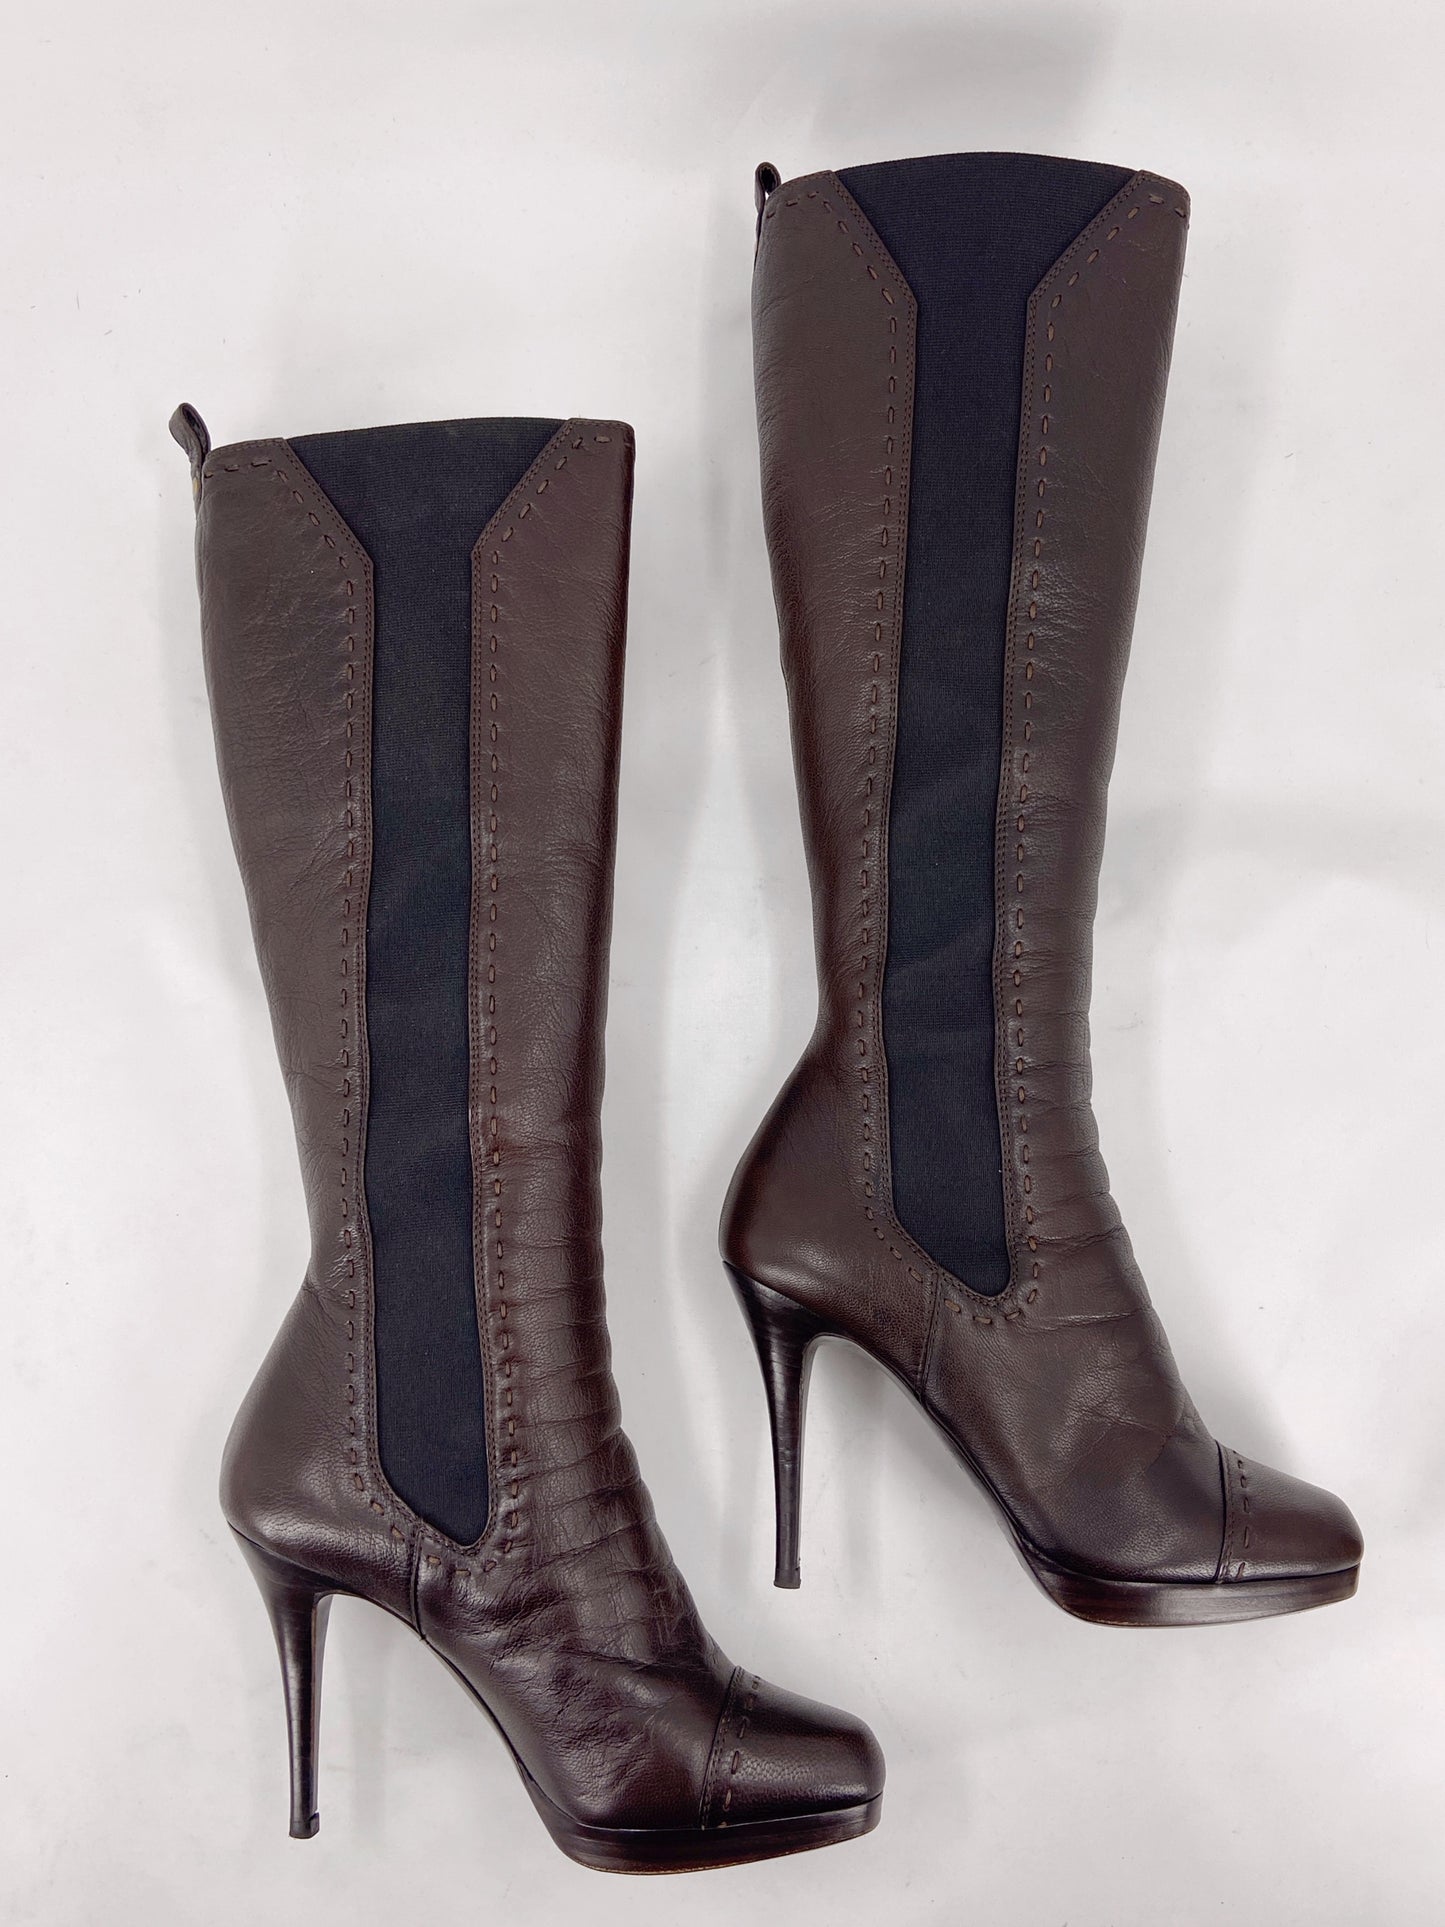 Yves Saint Laurent Rive Gauche Tom Ford Shearling Brown Heeled Stiletto Long Boots 37.5